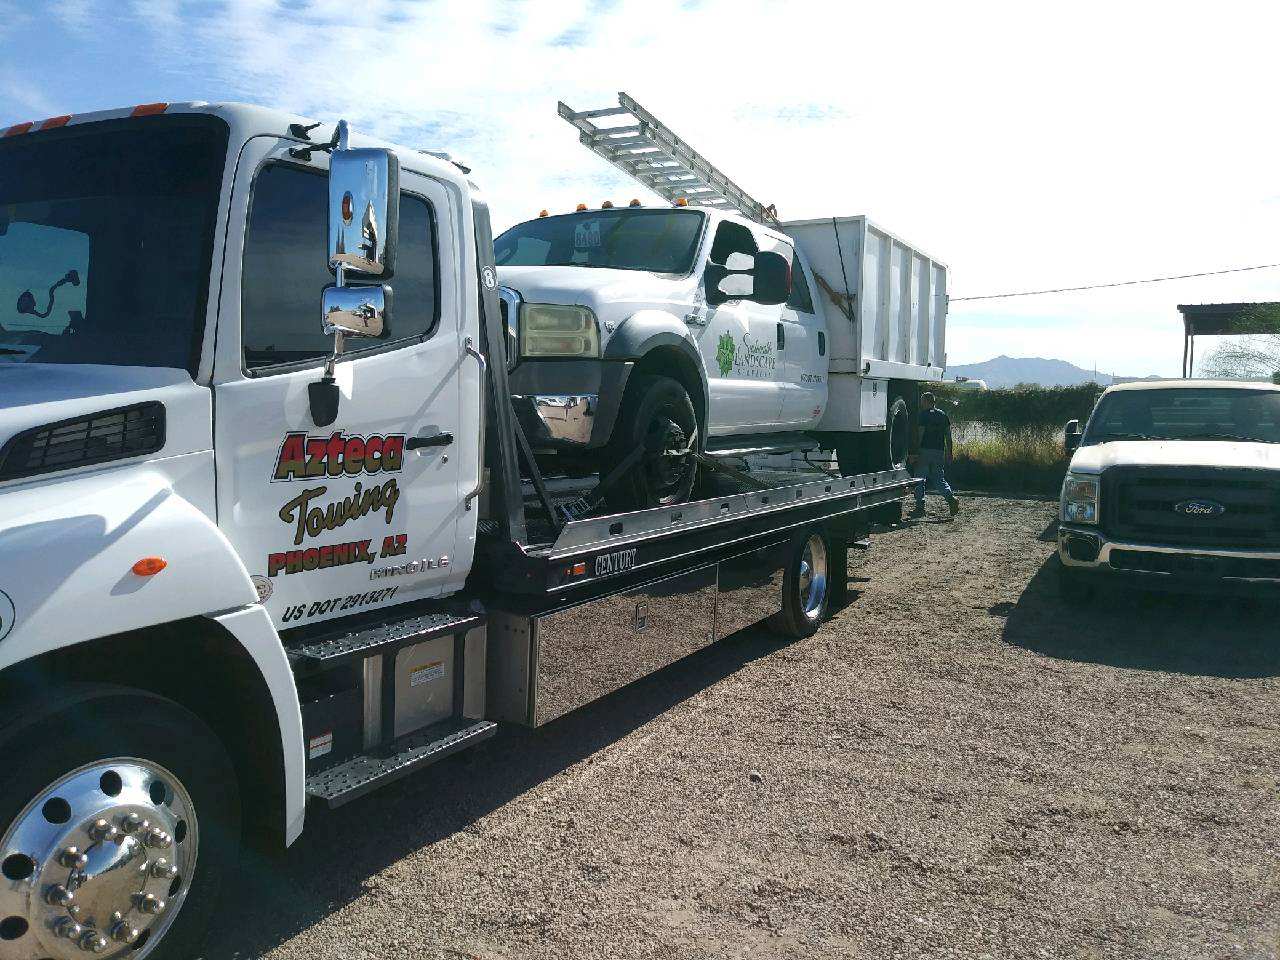 Can the Towing Service be reached 24/7?